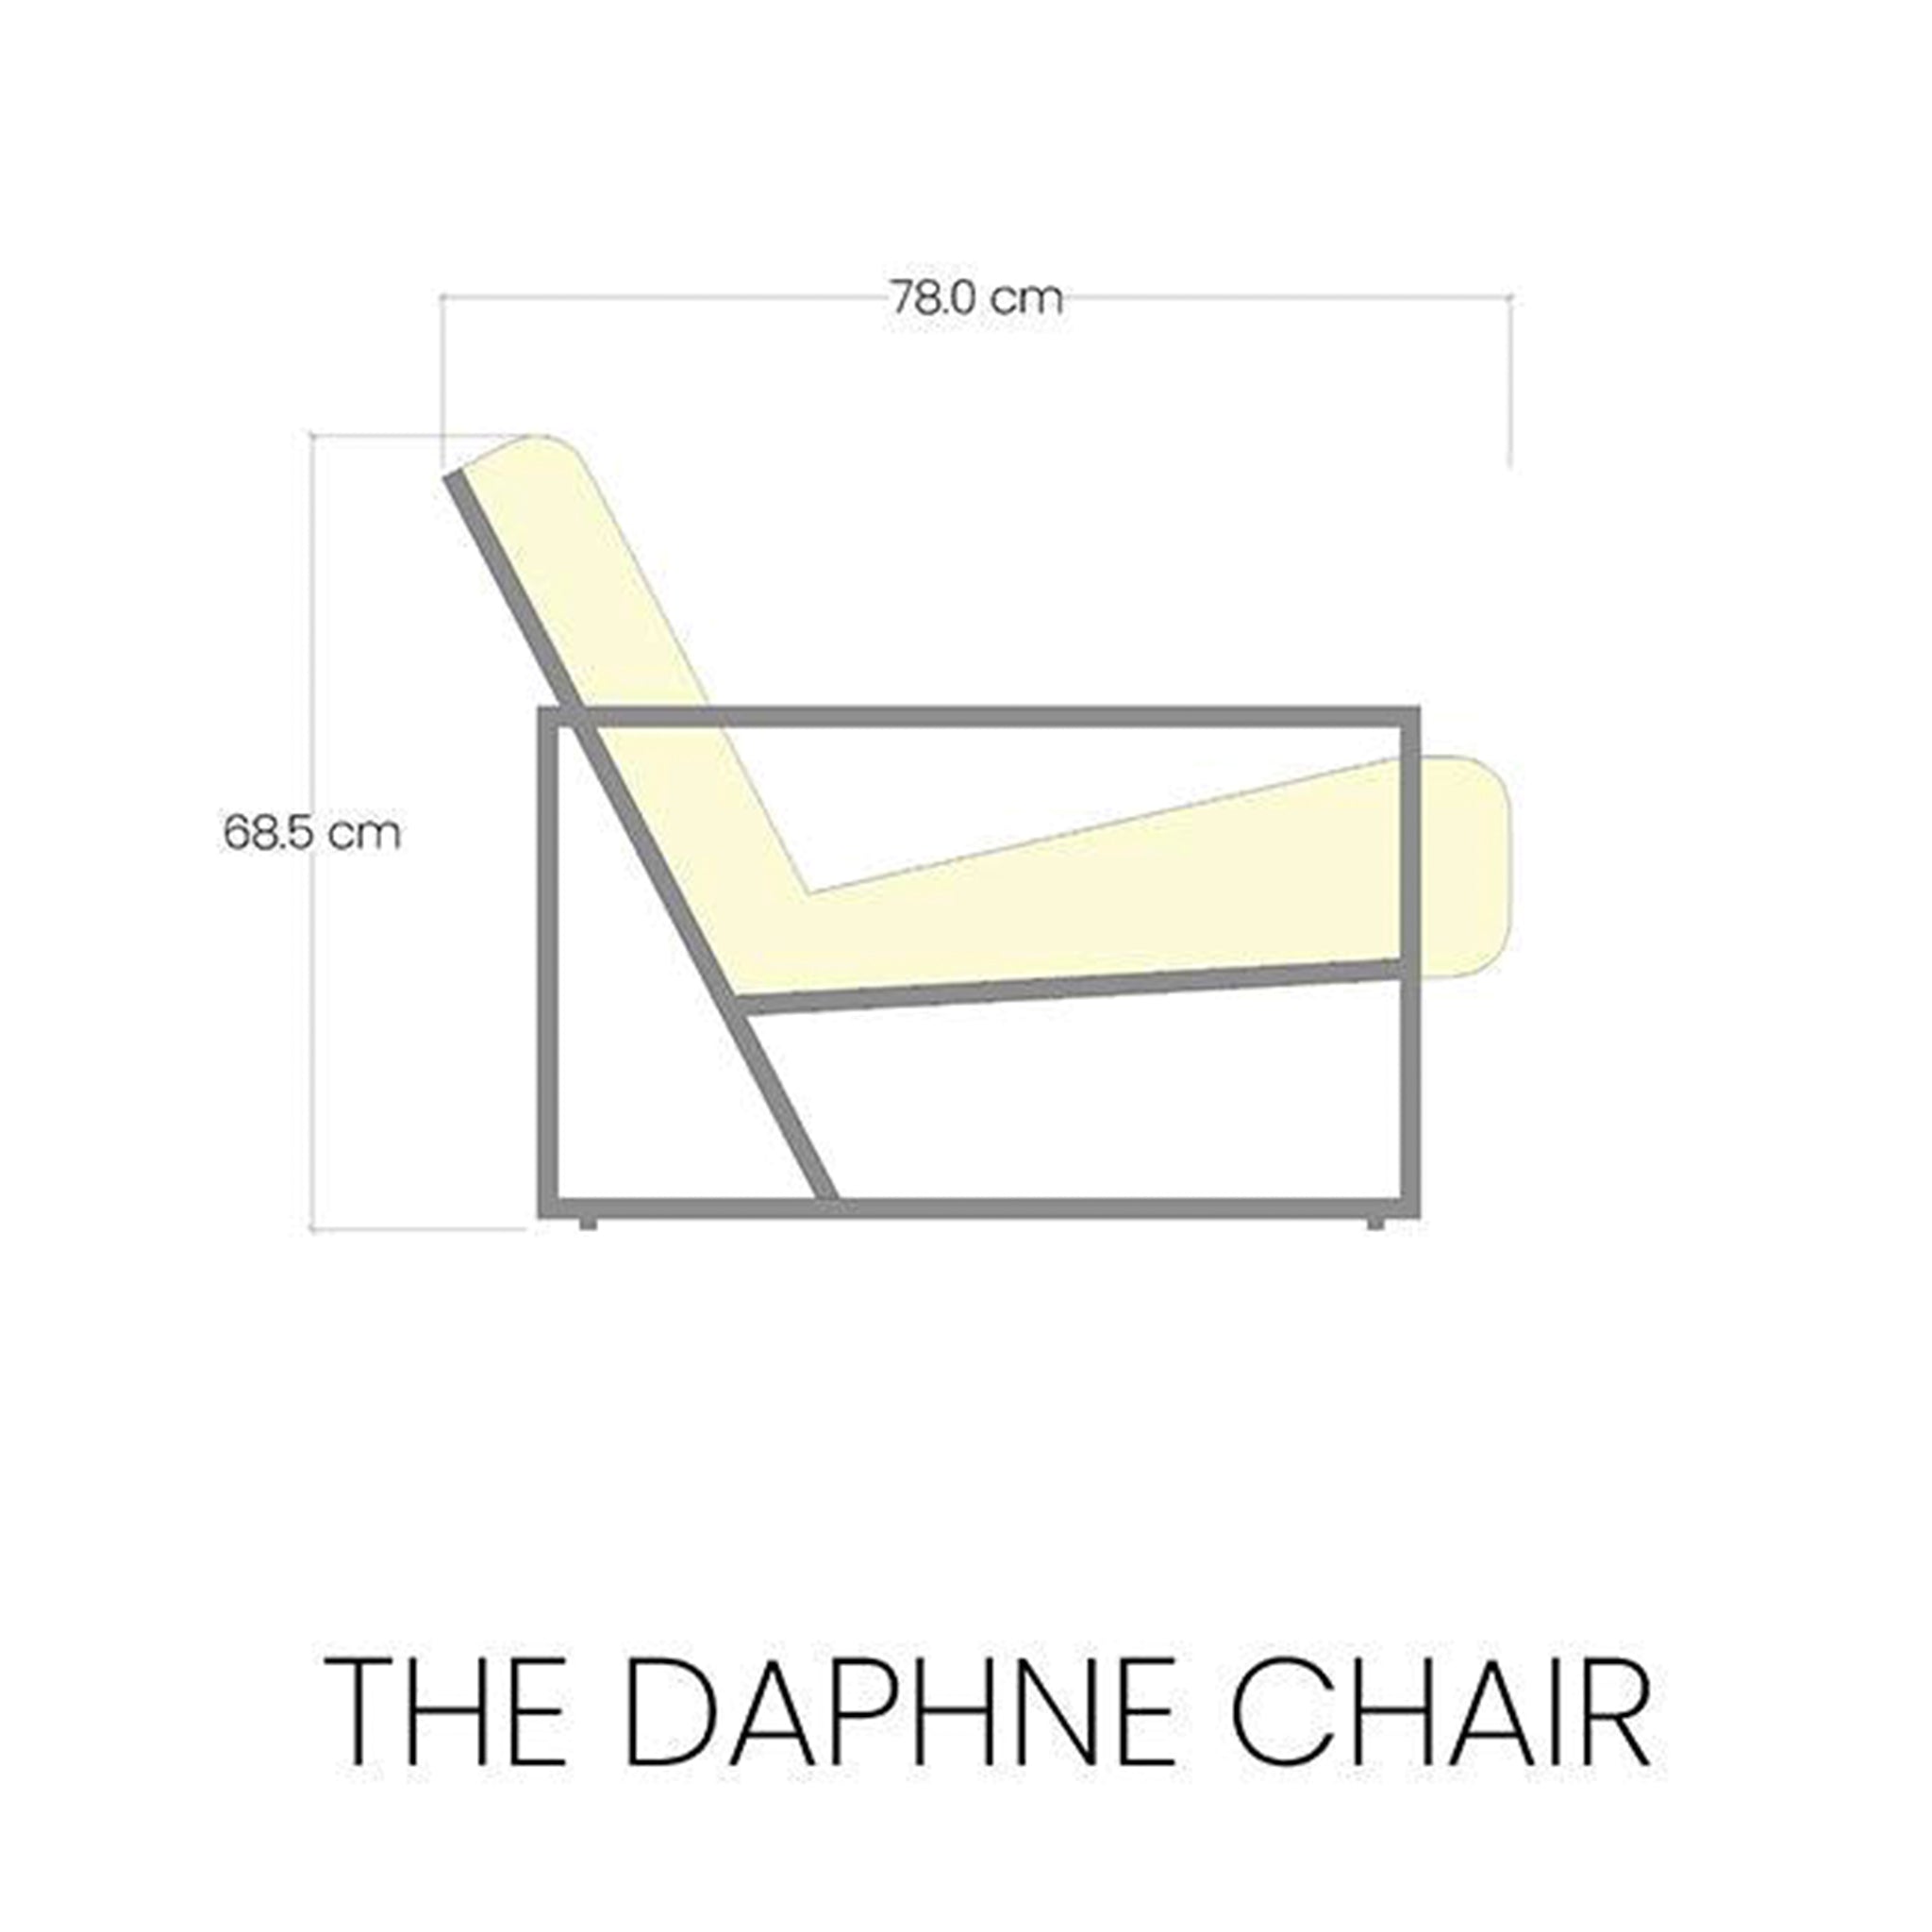 The Daphne Accent Chair with a navy blue cushion and black metal frame, perfect for any modern home.